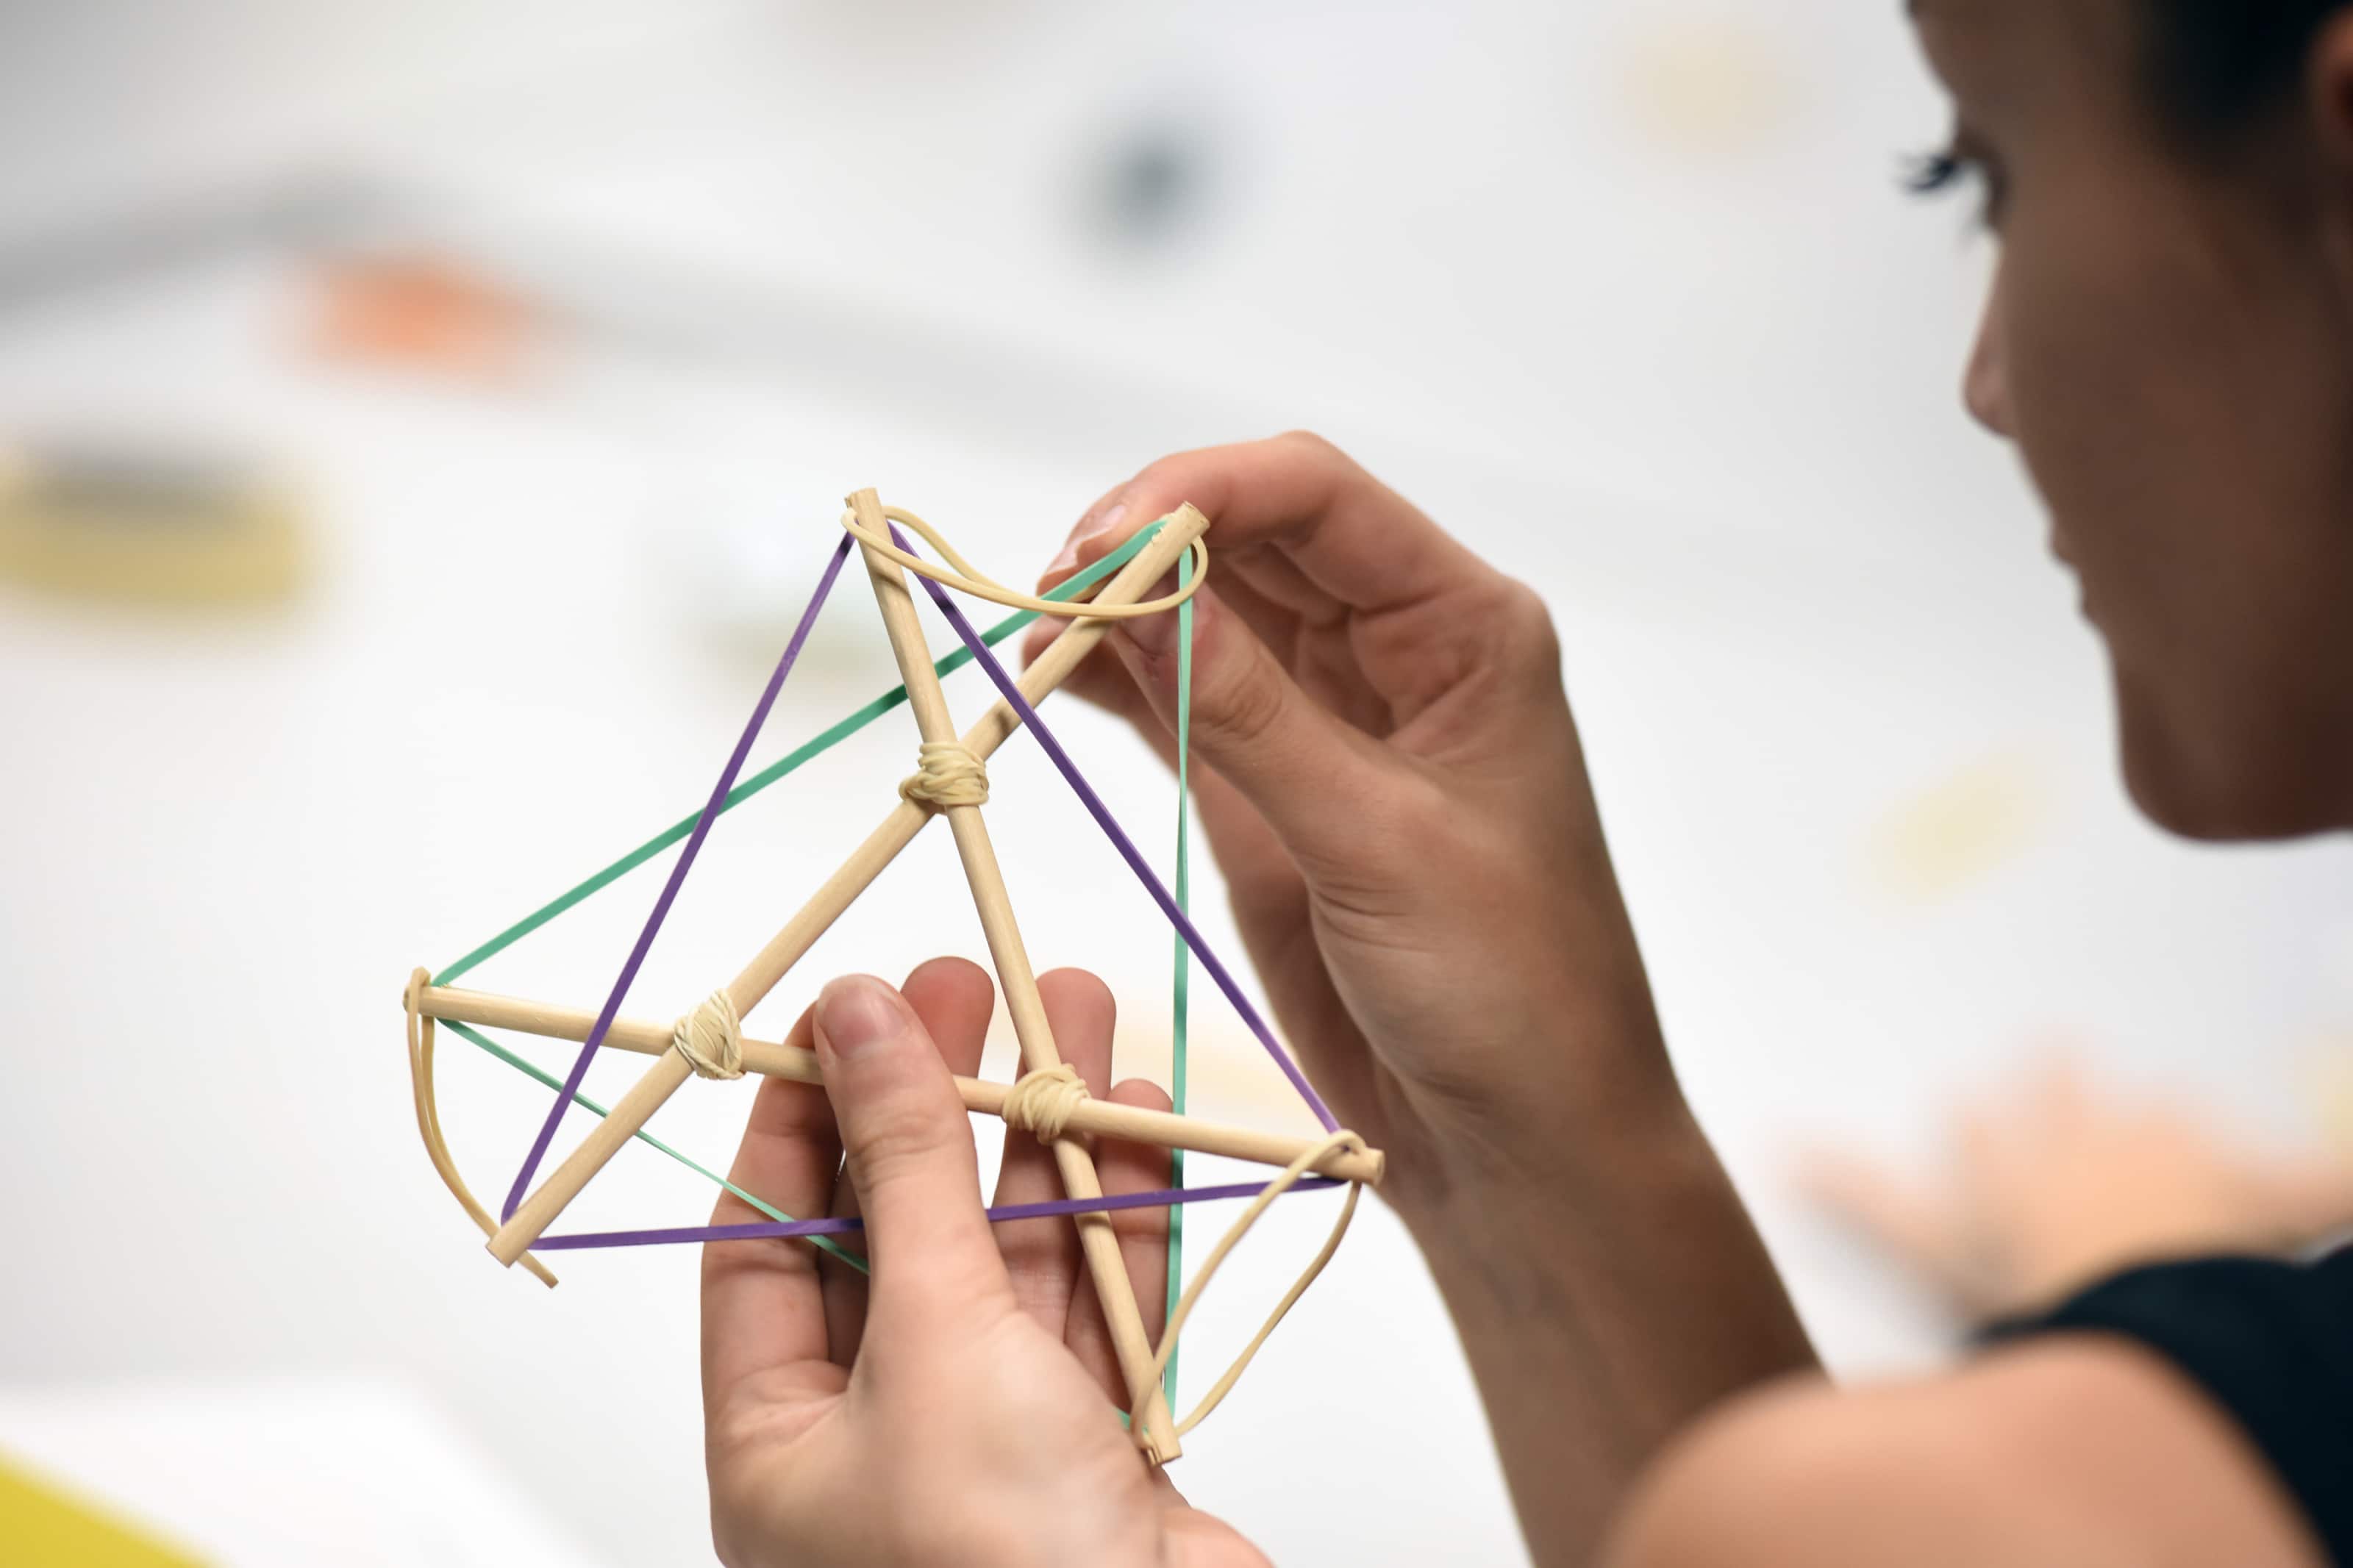 student holding a small 'tensegrity structure' that they created